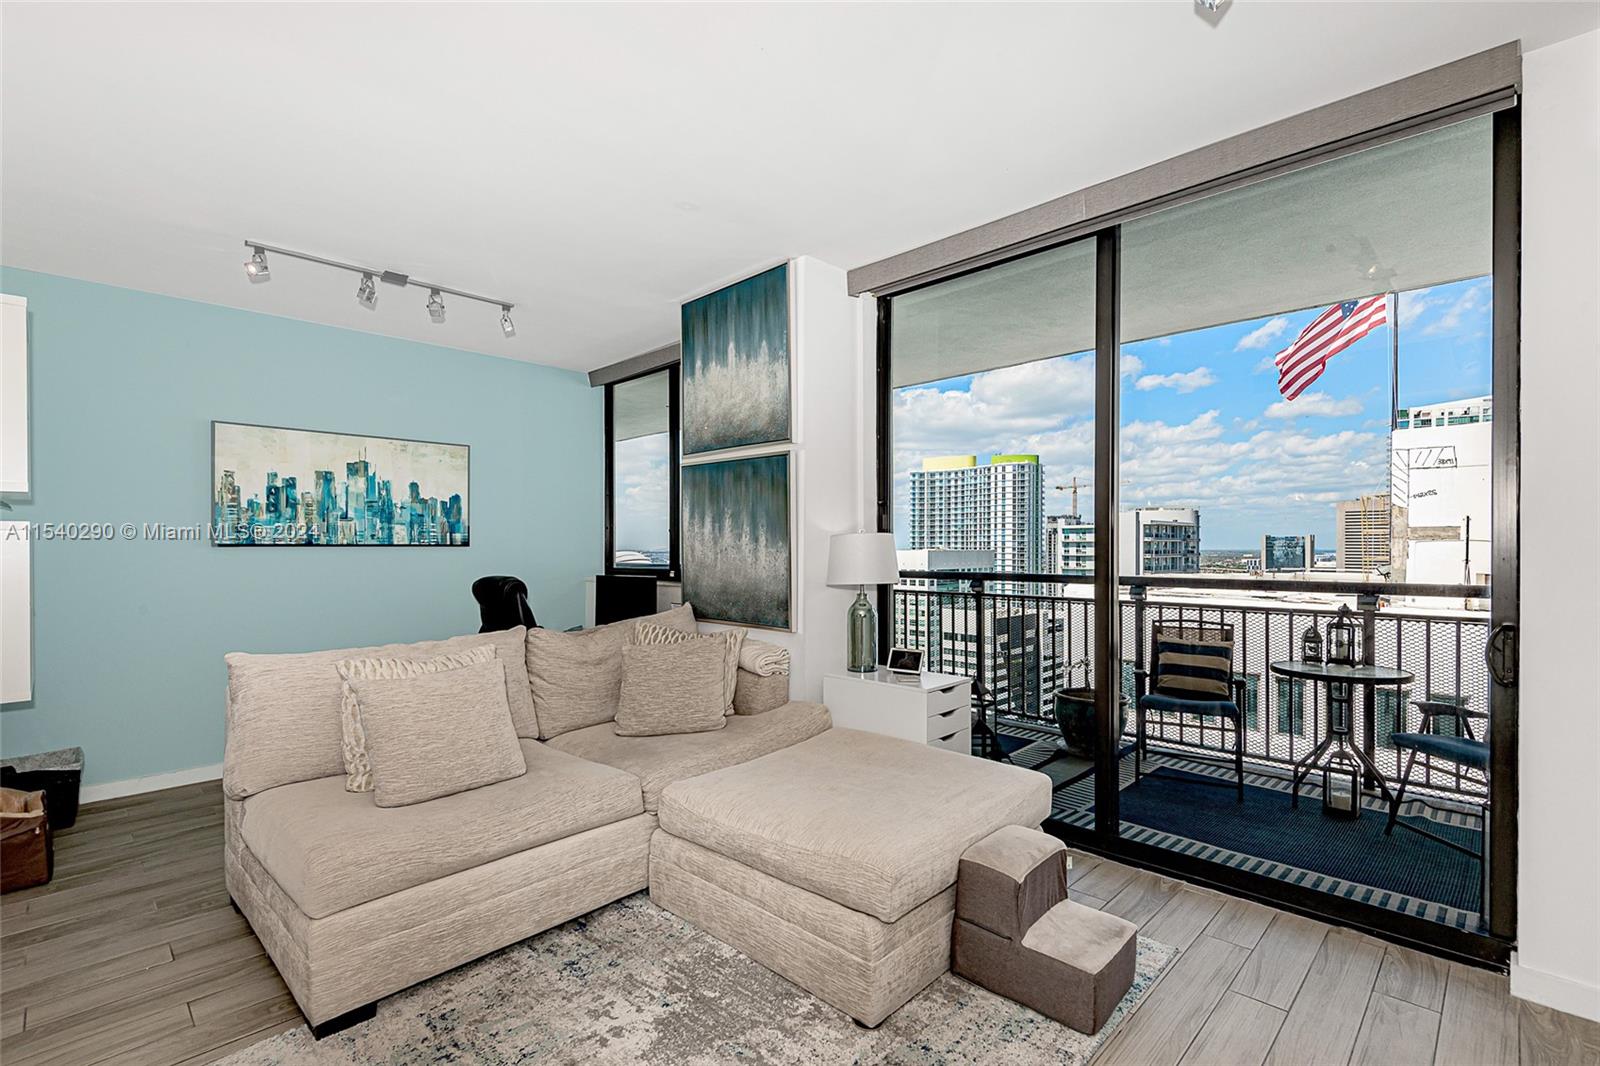 AVAILABLE EITHER FULLY FURNISHED OR UNFURNISHED AS TENANCY PREFERS - Ready to Lease - High floor, spacious 1/1 at The Nine - the center of everything Brickell.  Quality finishes and furnishings in every room.  This oversized 1/1 offers massive closets and storage spaces including an additional walk-in closet the size of most Brickell bedrooms.  High floor residence with private oversized balcony.  Nine offers many well-appointed amenities including a gorgeous newly renovated pool, large well equipped Fitness Center, open use Library with printing services, glass enclosed Conference Room, spacious Club Room, multi-use Game Room, beautiful Childrens playroom - Plus - Publix is literally right downstairs.  Easy to show.